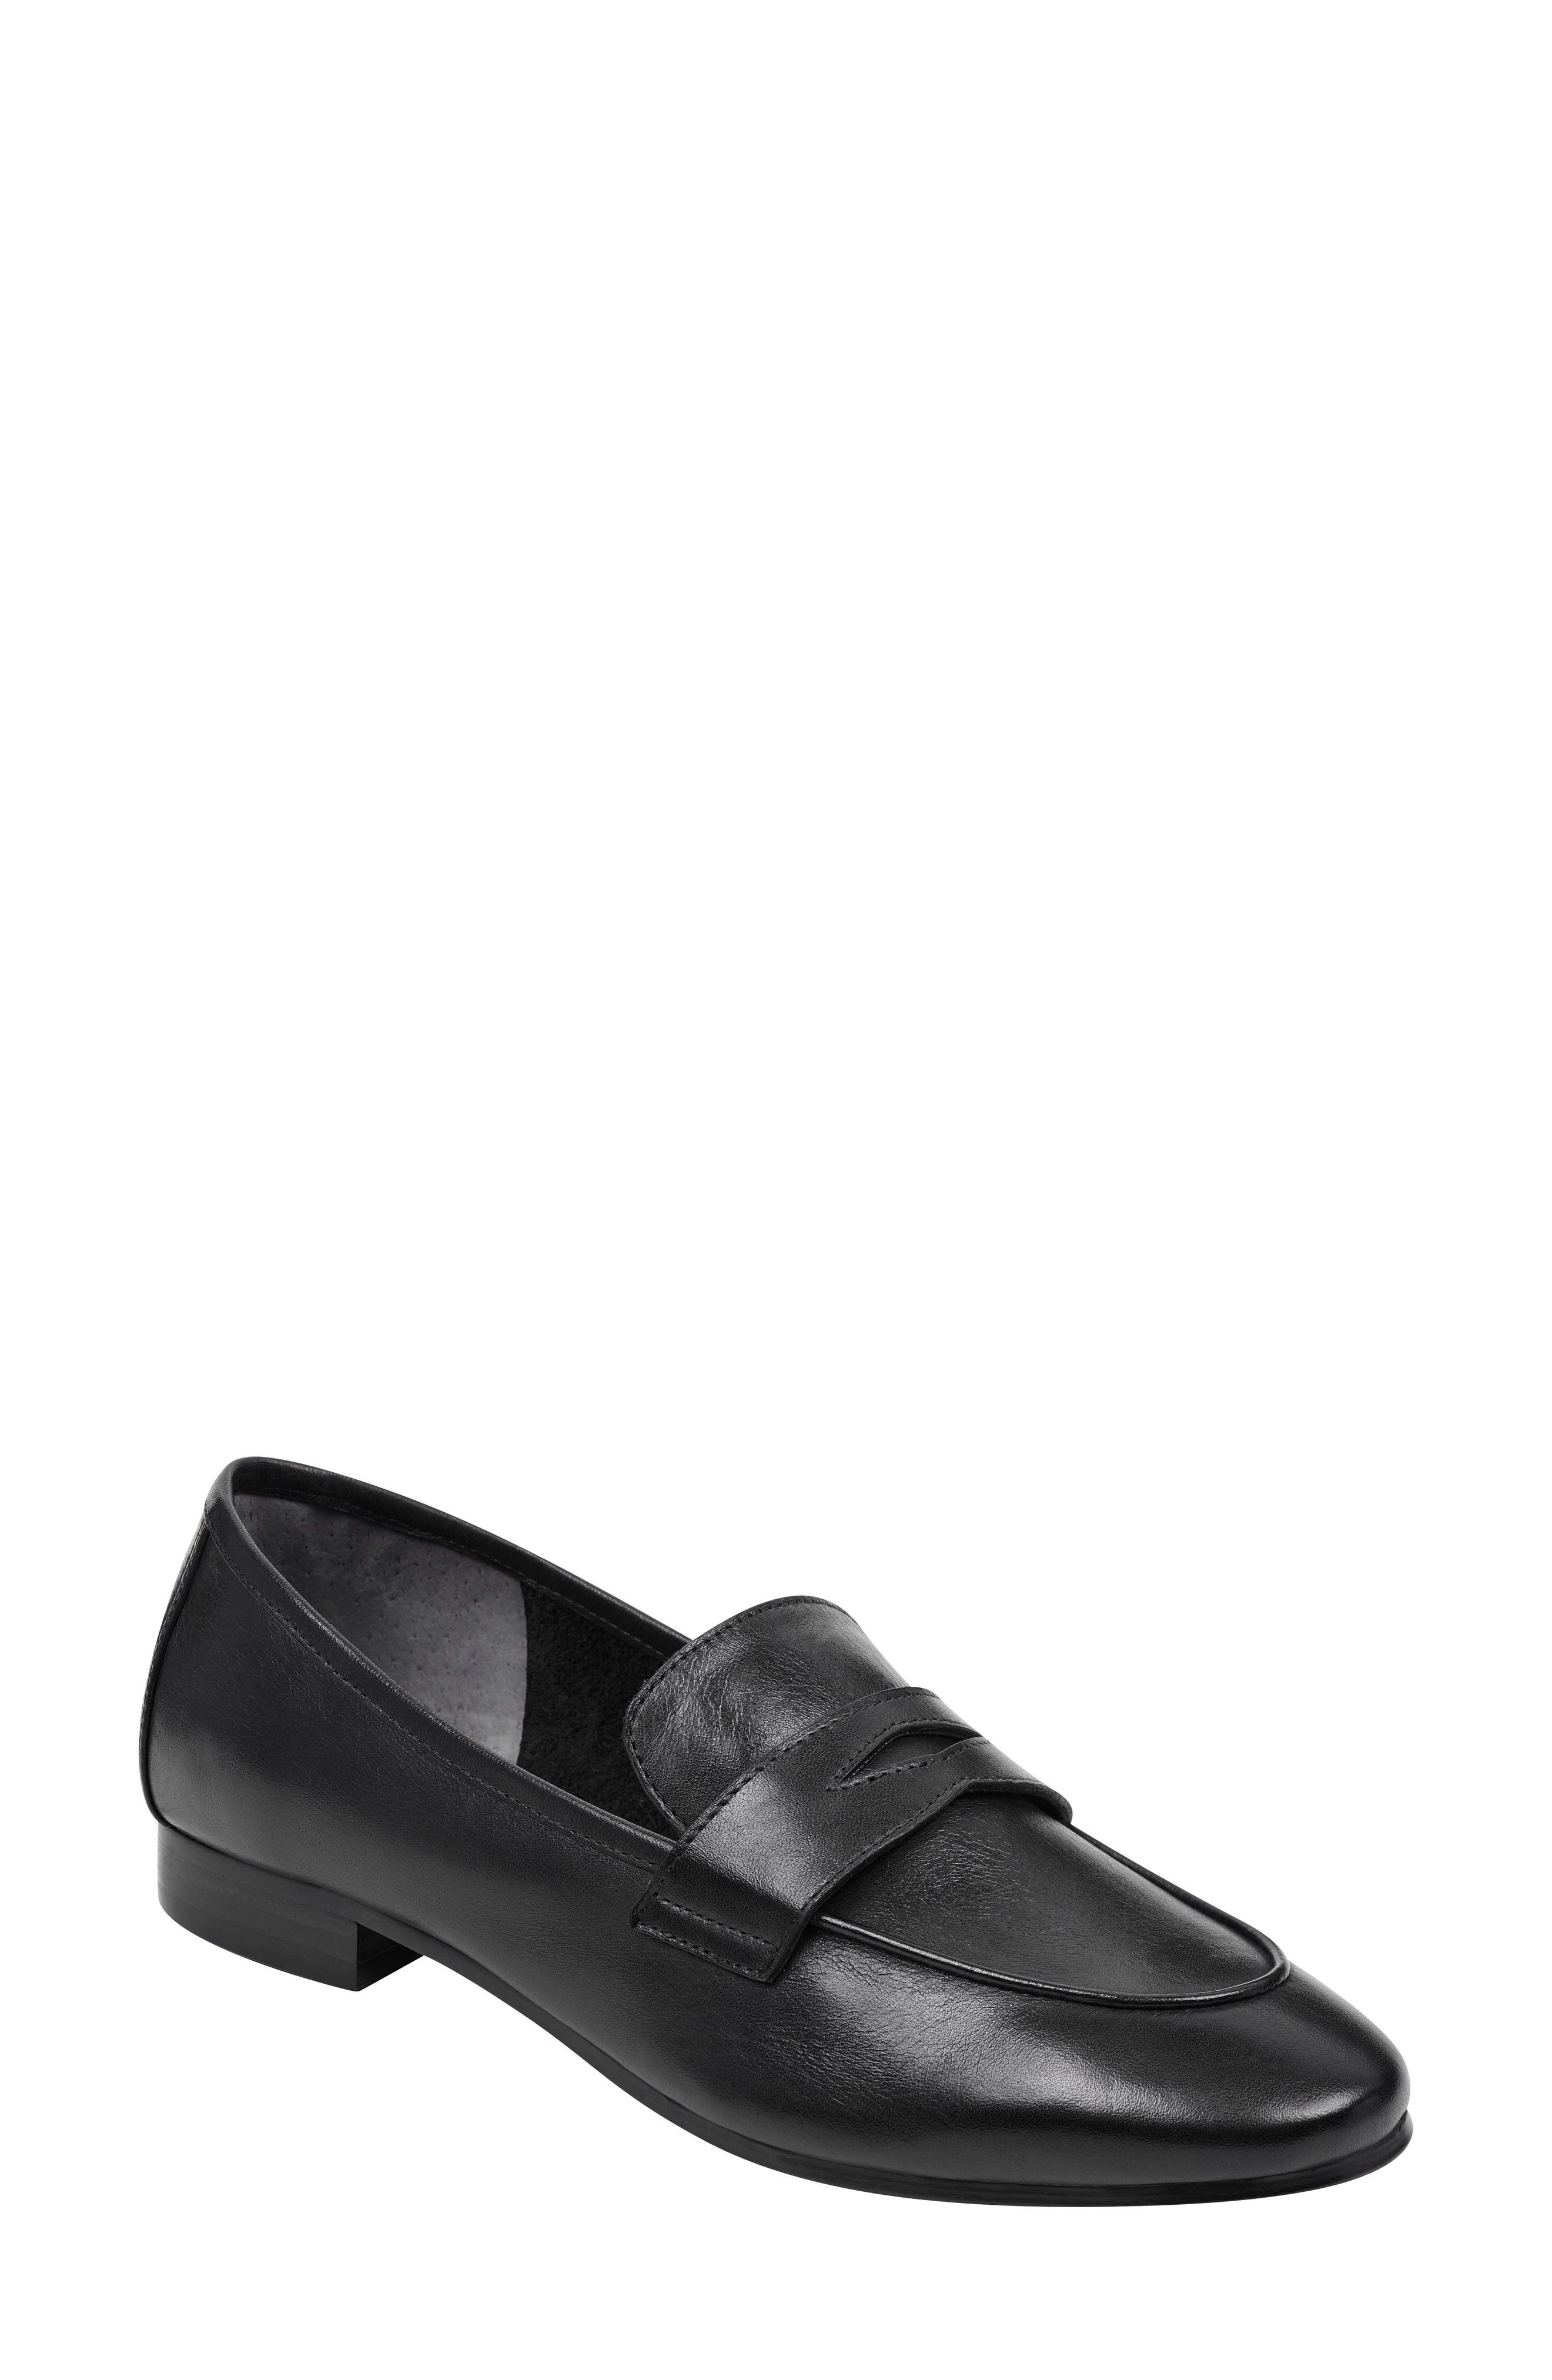 marc fisher chang loafer